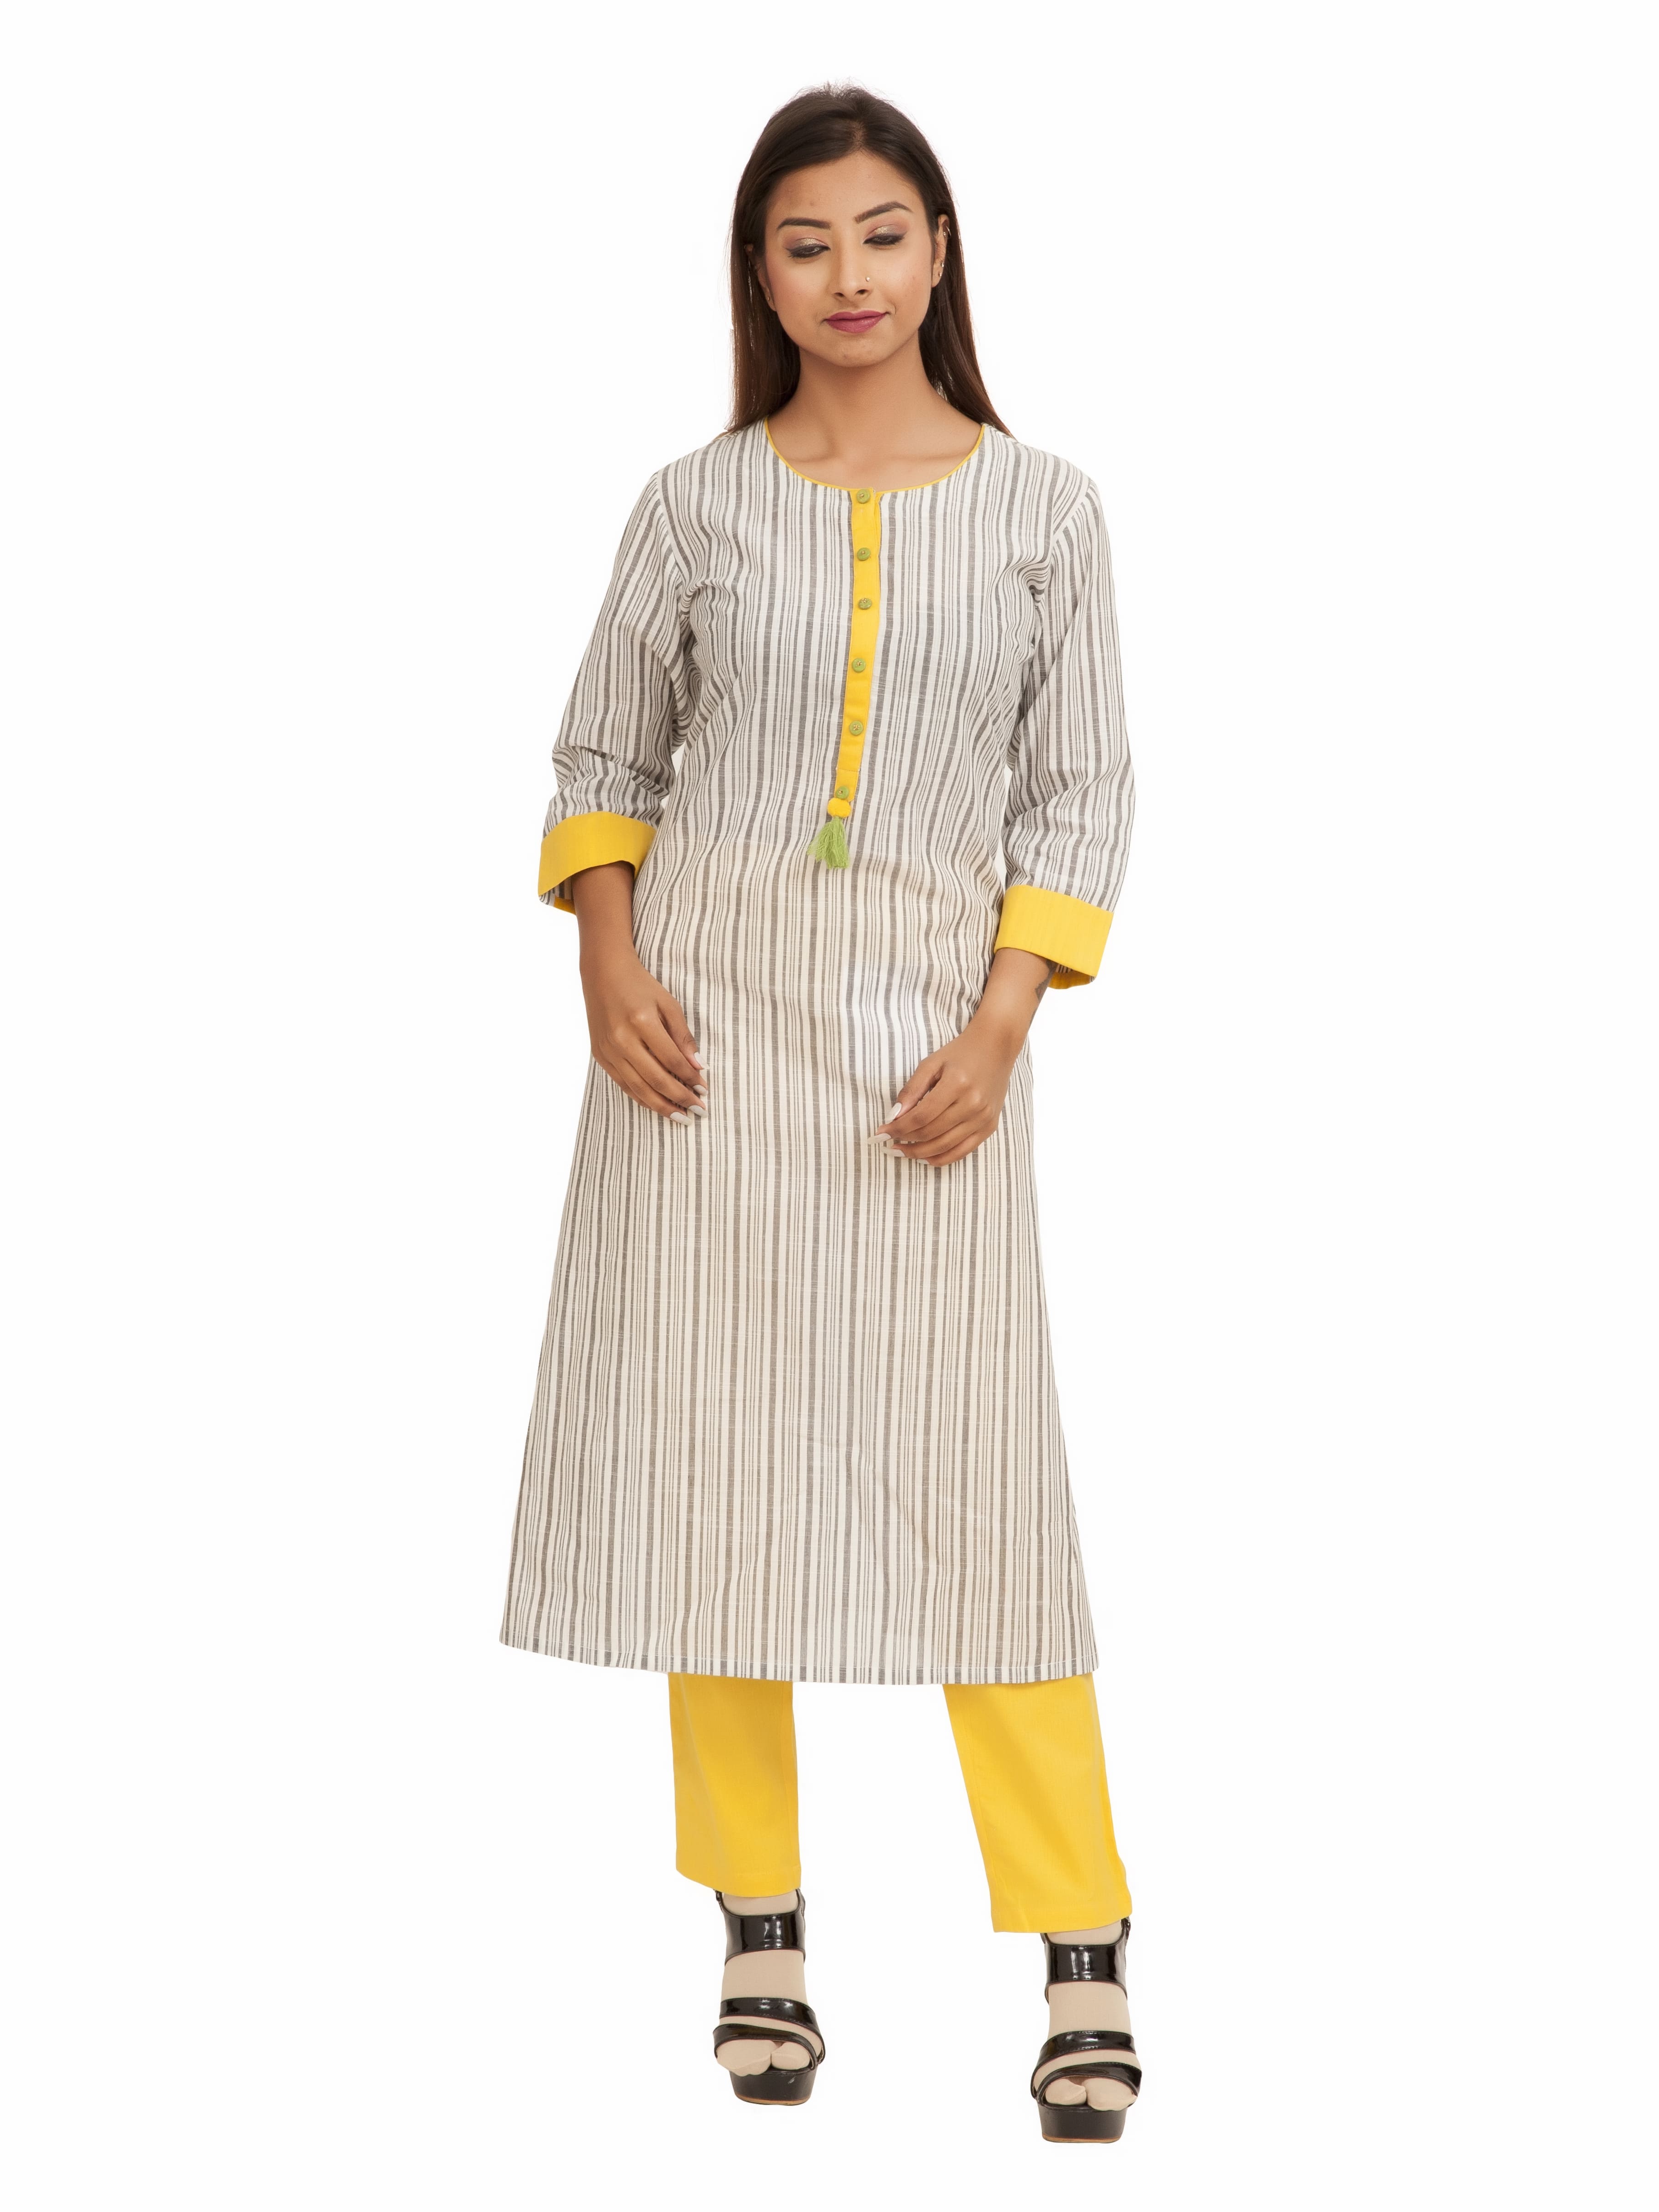 Wholesale Dress Material Suppliers in India